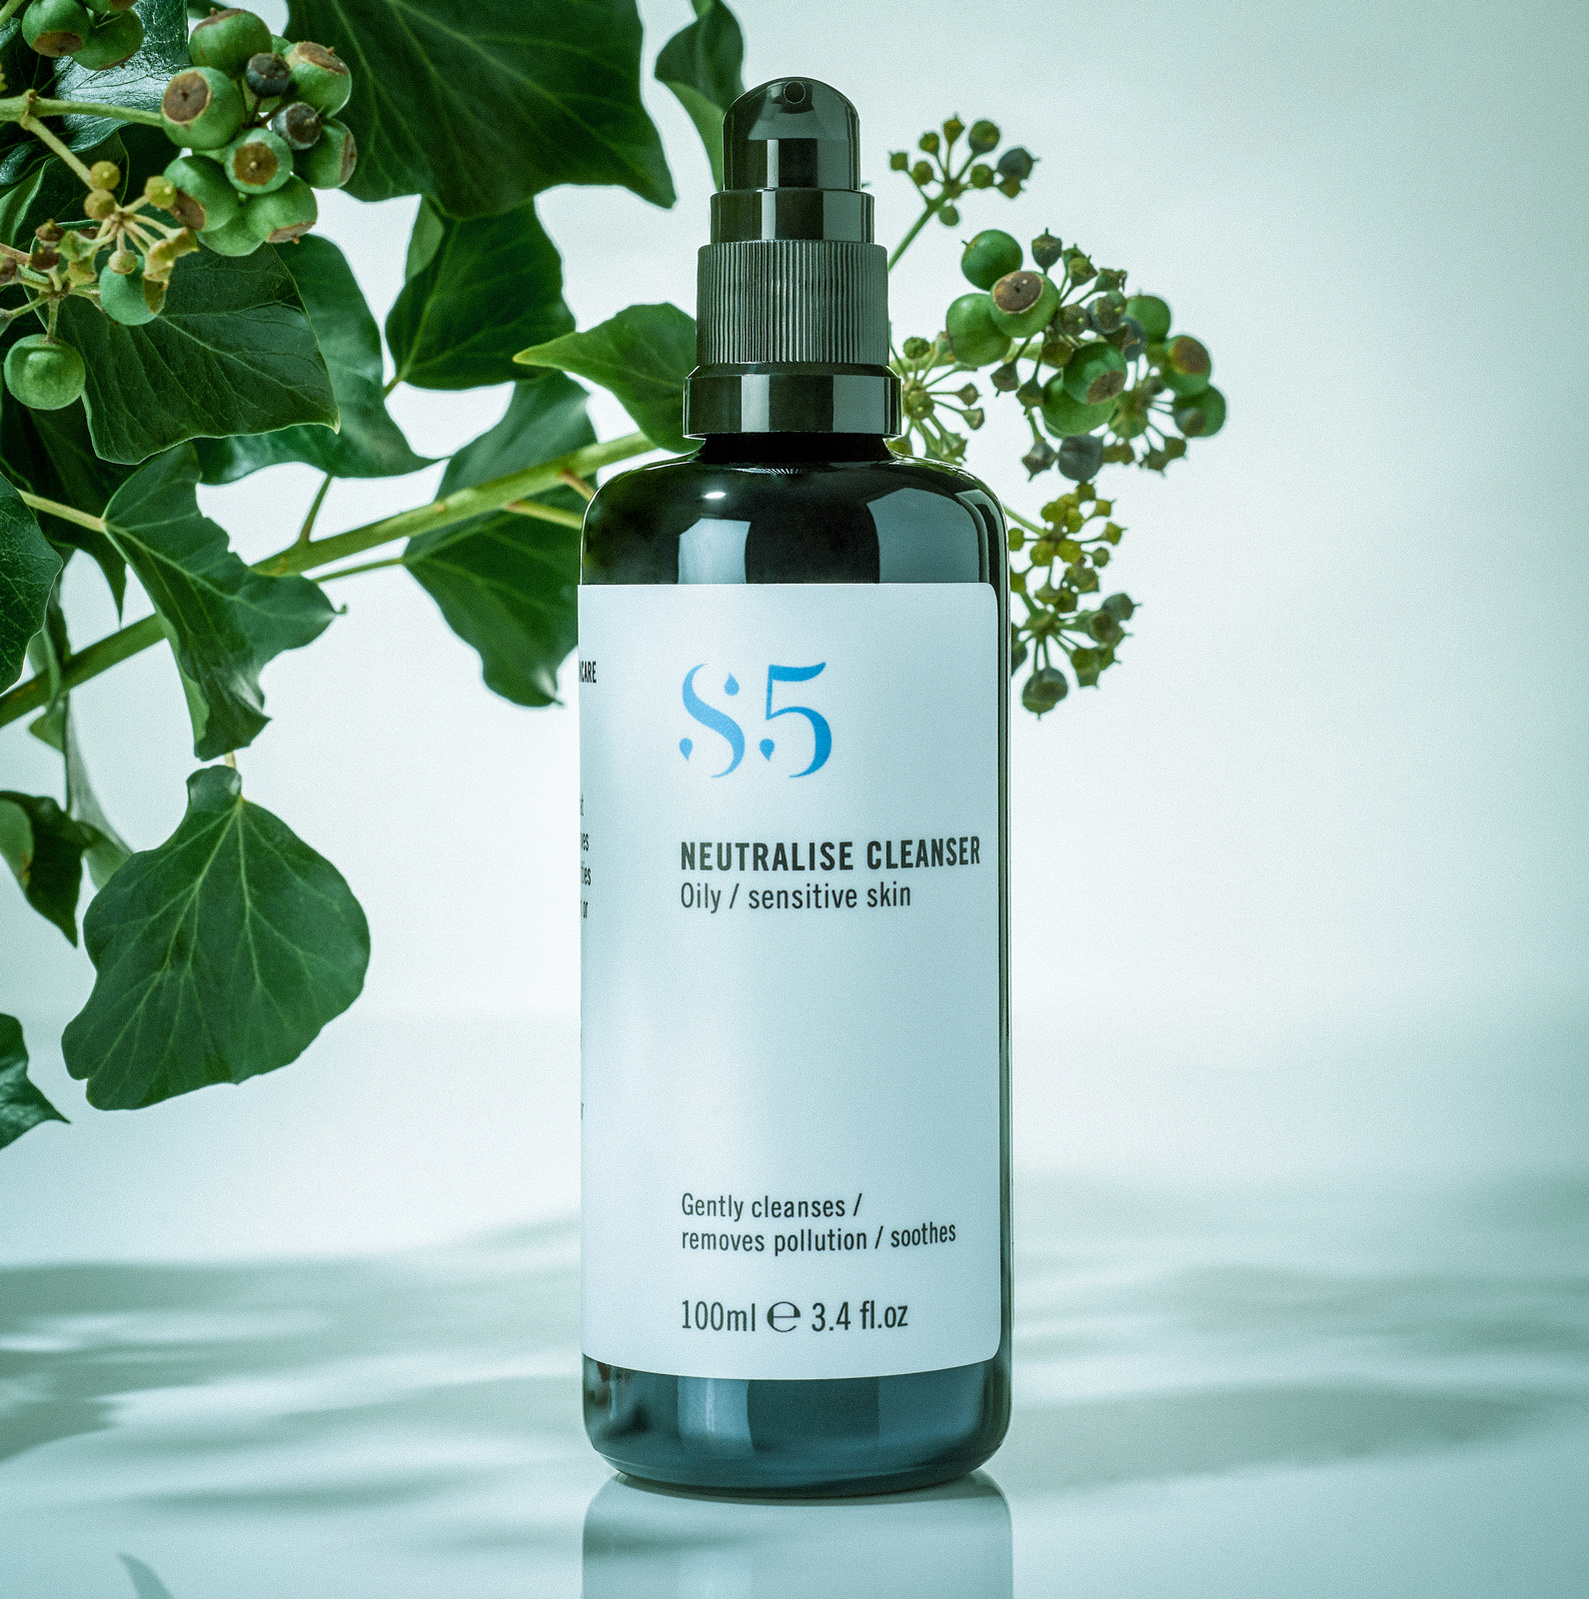 Studio Product Photography set up of bottle of natural skincare beauty serum with plant in background